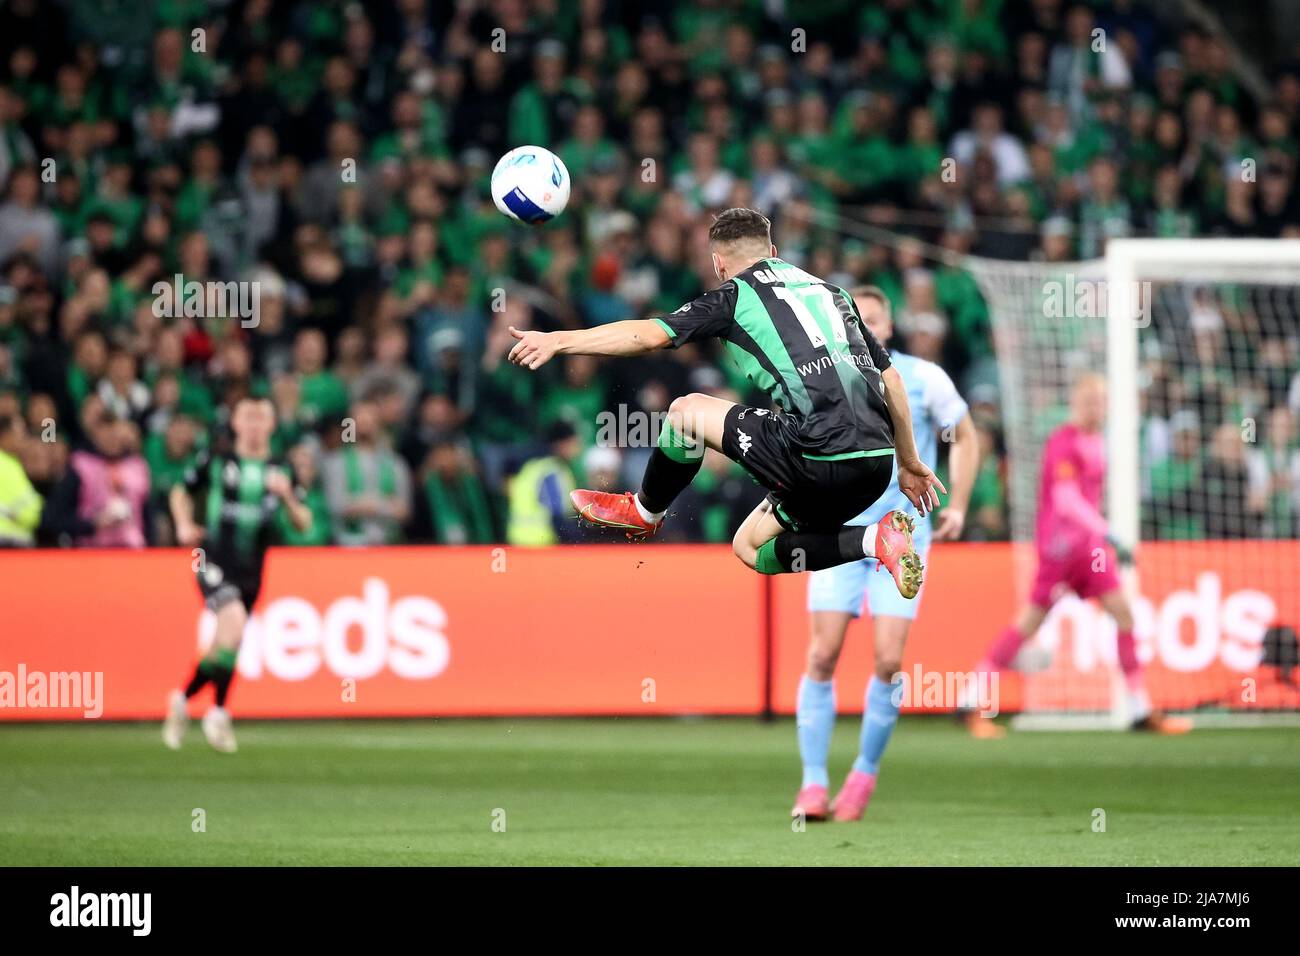 Melbourne, Australia, 28 May, 2022. Benjamin Garuccio of Western United kicks the ball during the A-League Grand Final soccer match between Melbourne City FC and Western United at AAMI Park on May 28, 2022 in Melbourne, Australia. Credit: Dave Hewison/Speed Media/Alamy Live News Stock Photo